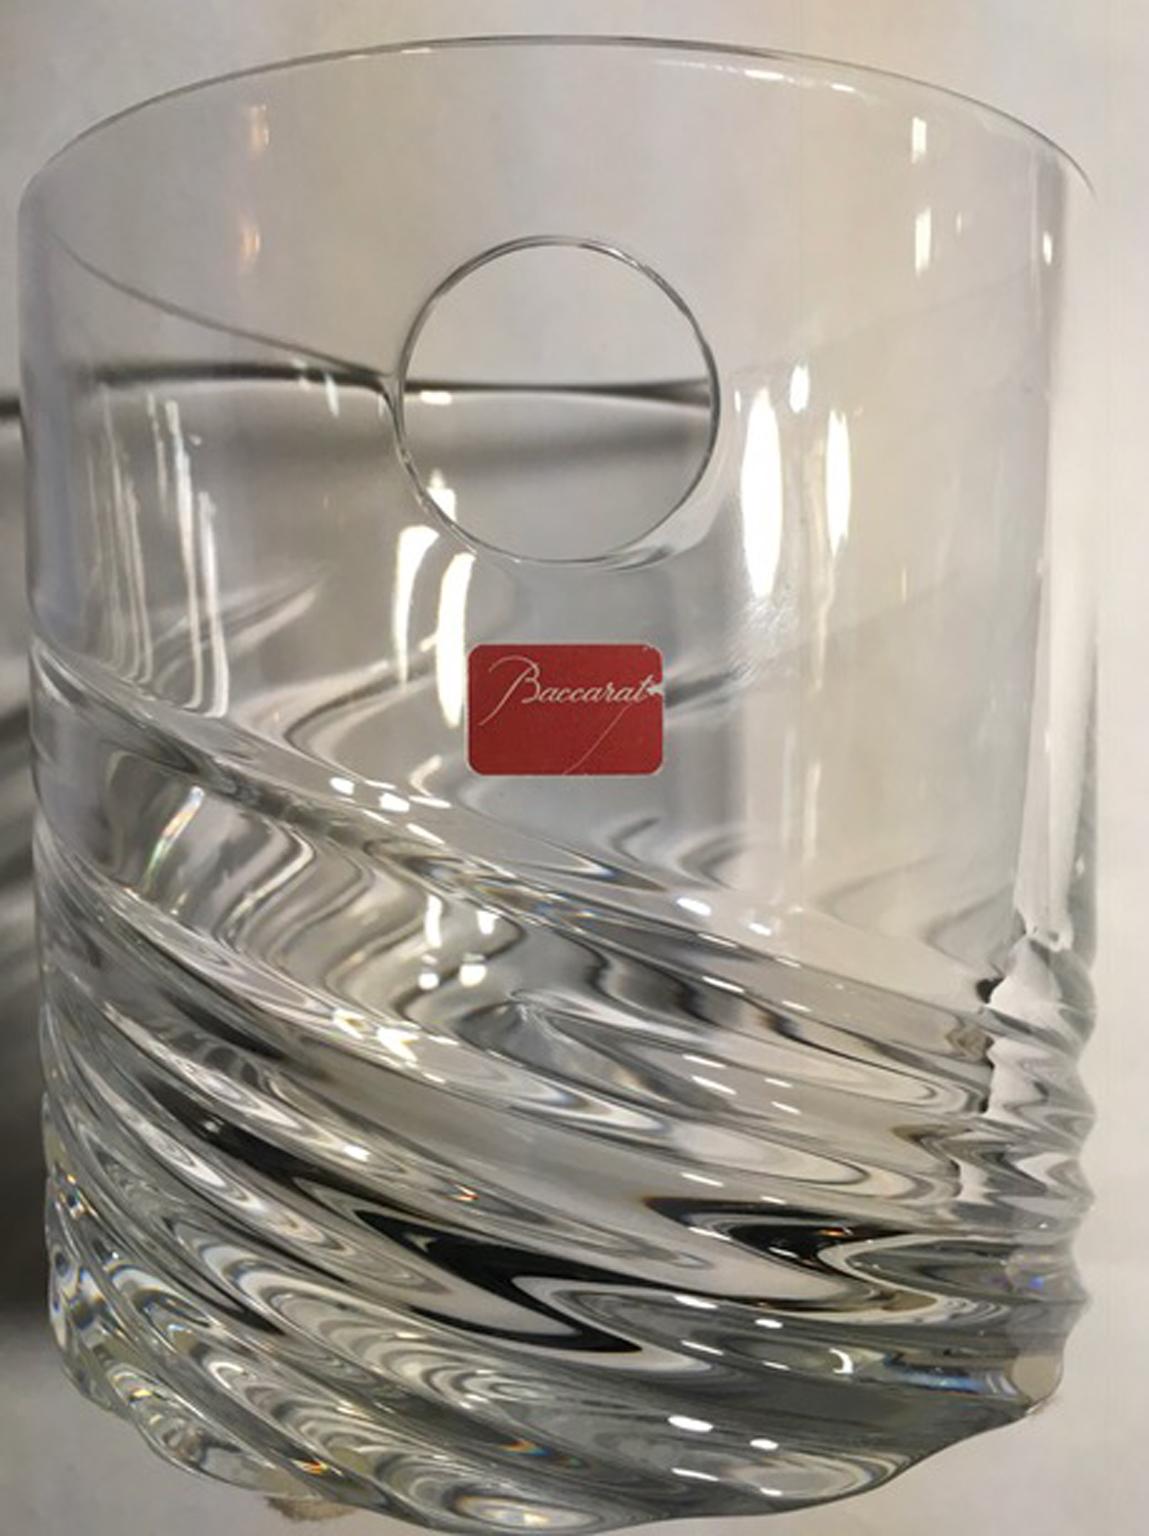 This modern Baccarat crystal vase can be used like a flower vase or like ice bucket.
More it can be simply collected for his beauty.
We're authorized dealer in Brescia, Italy for Baccarat.
Baccarat guarantee attached.